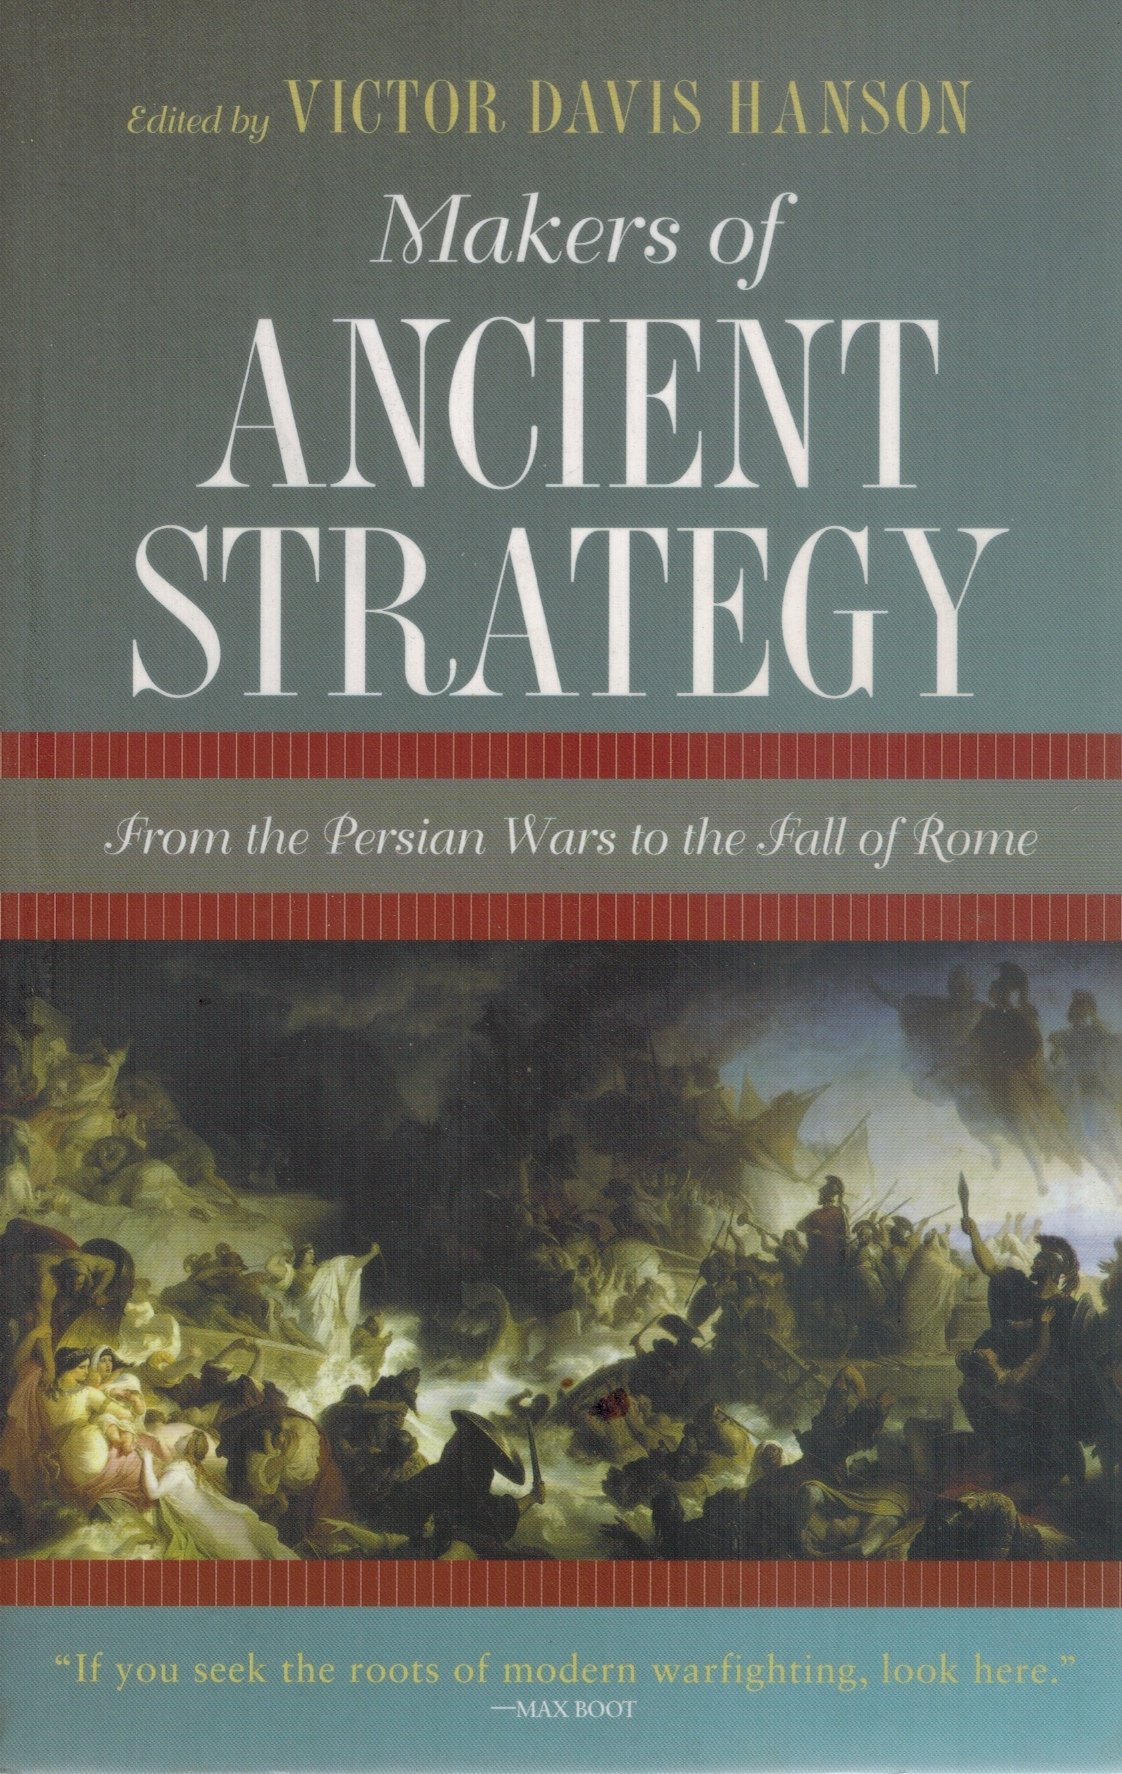 MAKERS OF ANCIENT STRATEGY From the Persian Wars to the Fall of Rome  by Hanson, Victor Davis